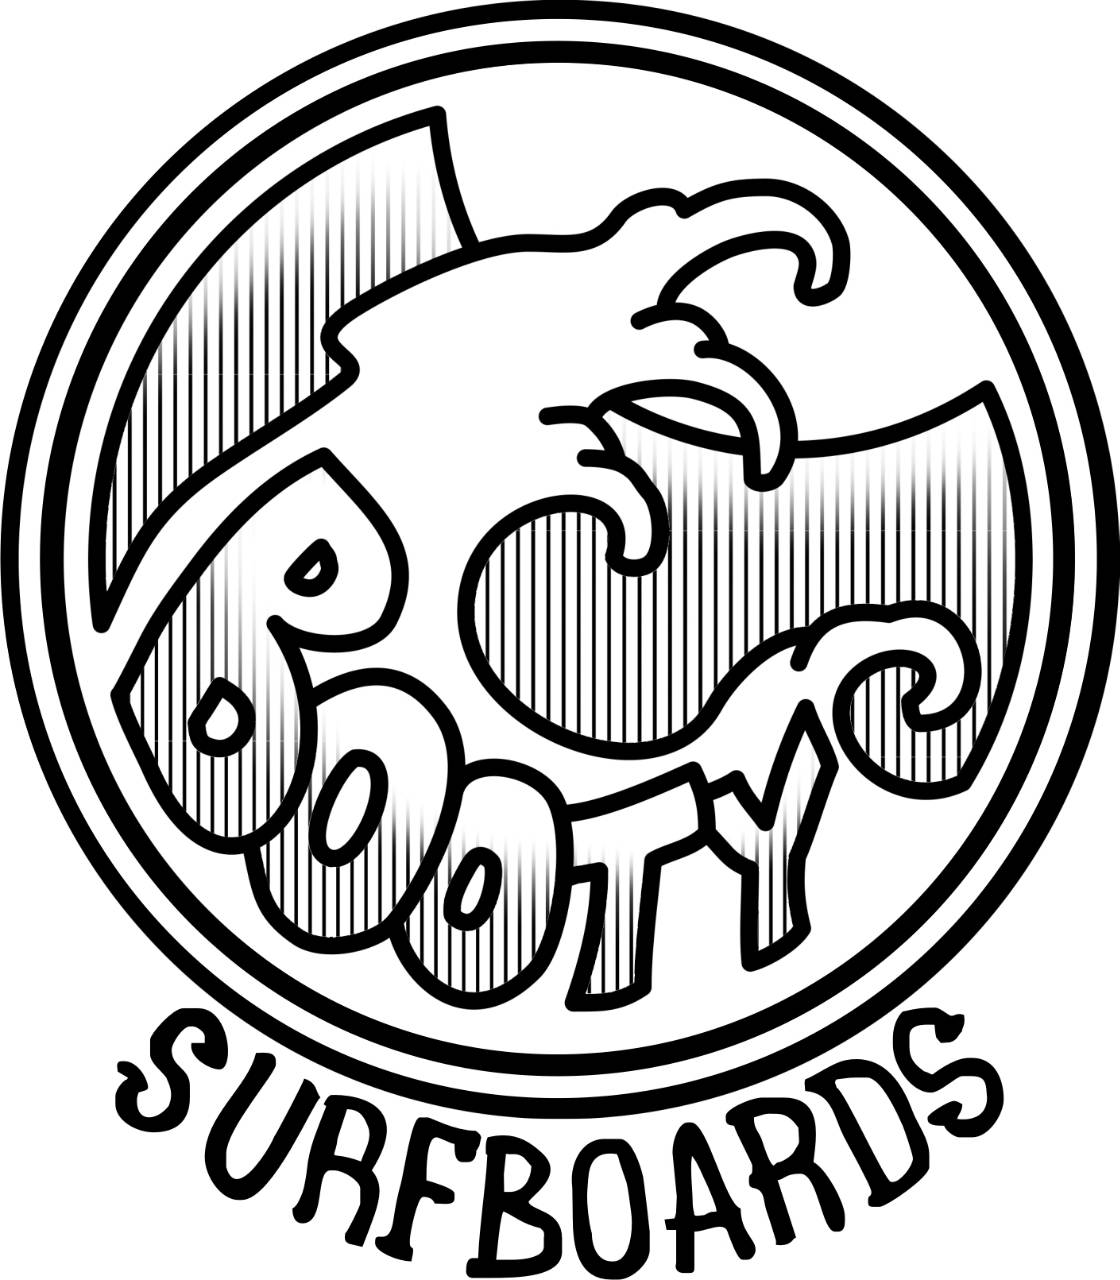 Booty surfboards